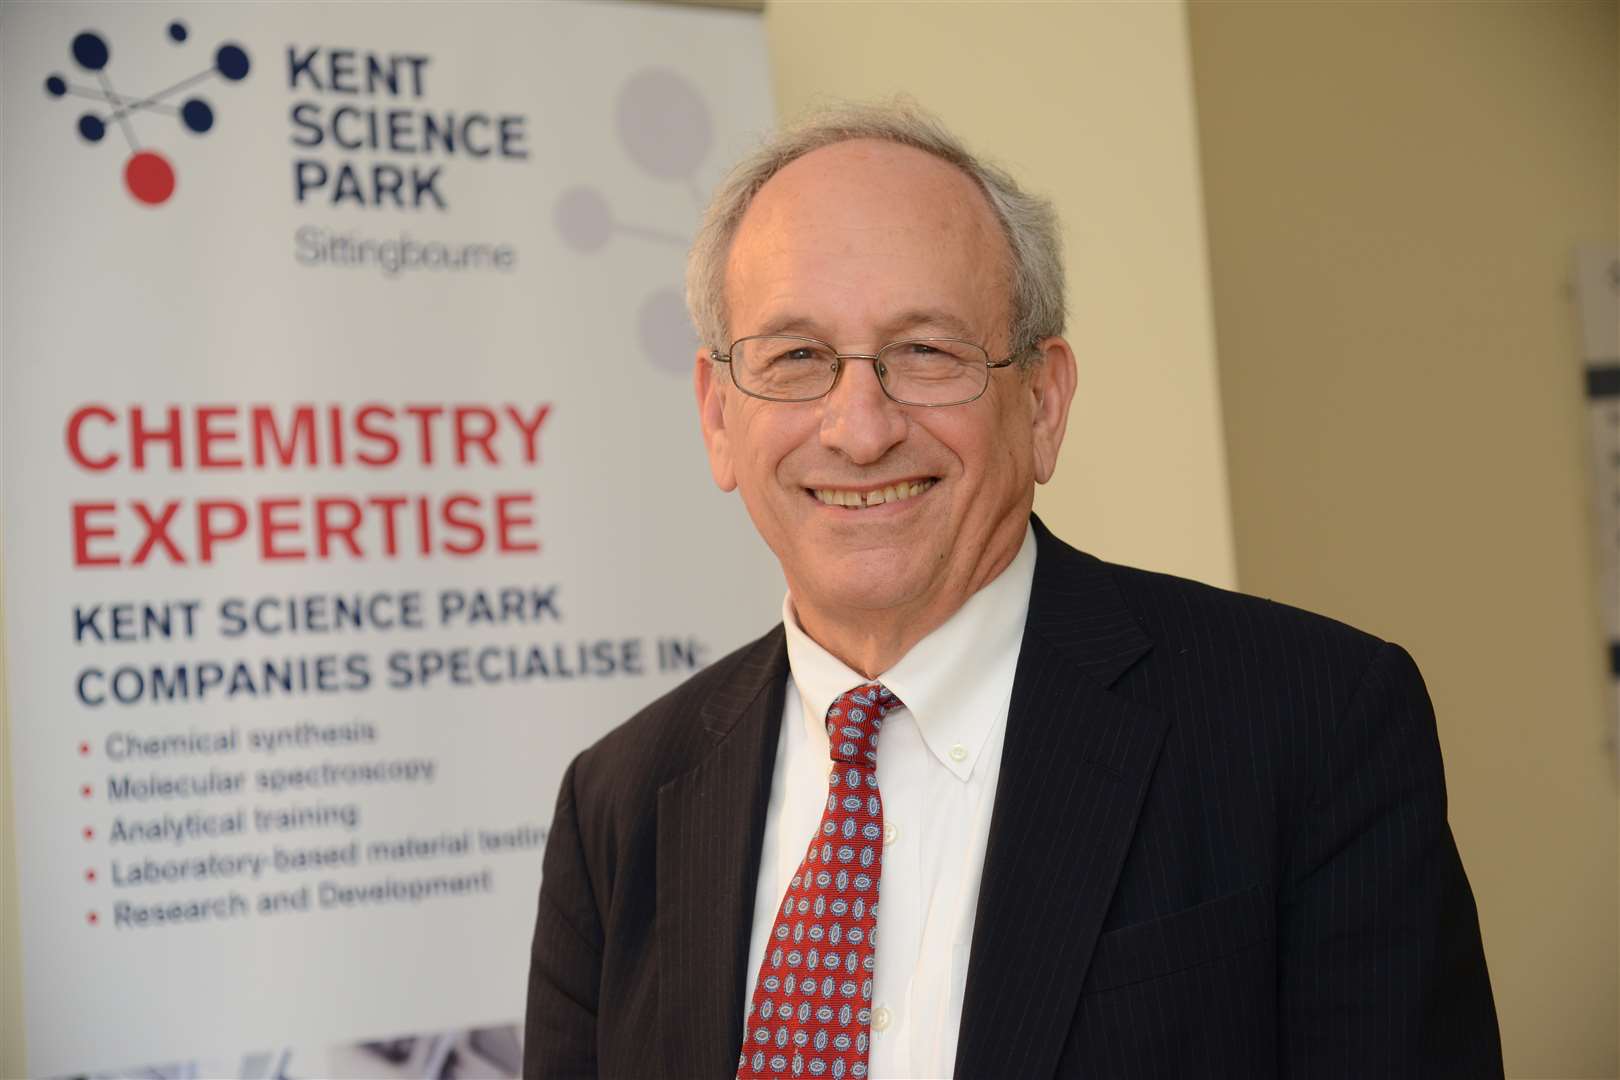 Don Kohn visited Kent Science Park in Sittingbourne to find out what is happening in the county's economy